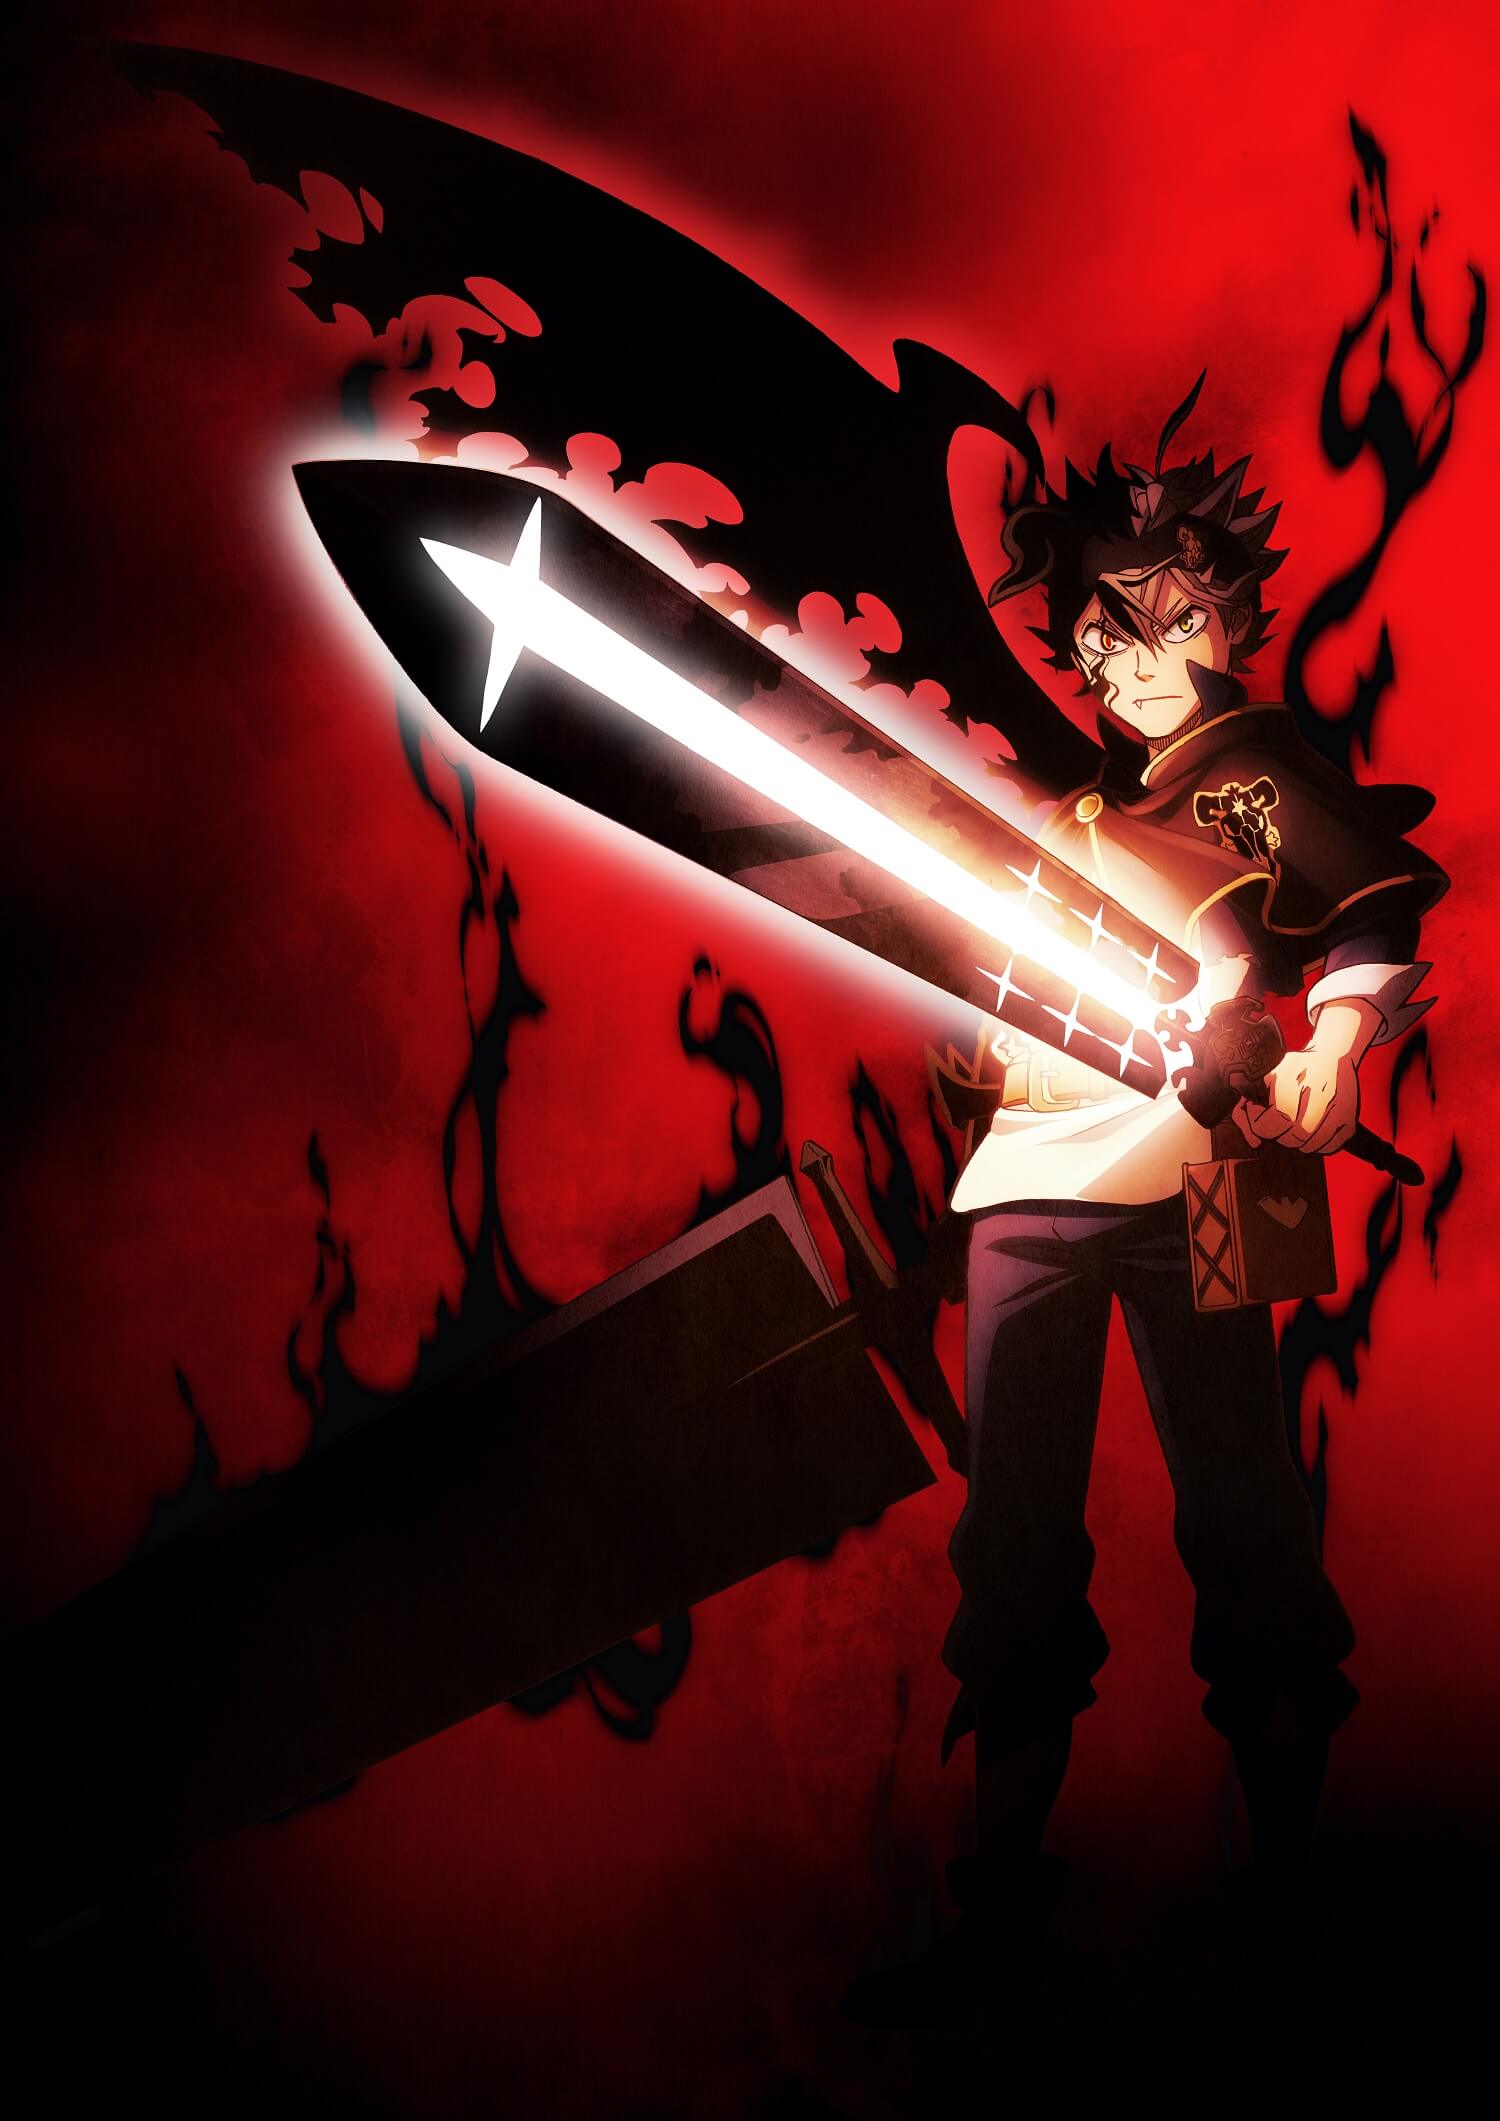 Black Clover' Reveals New Opening, Ending Themes